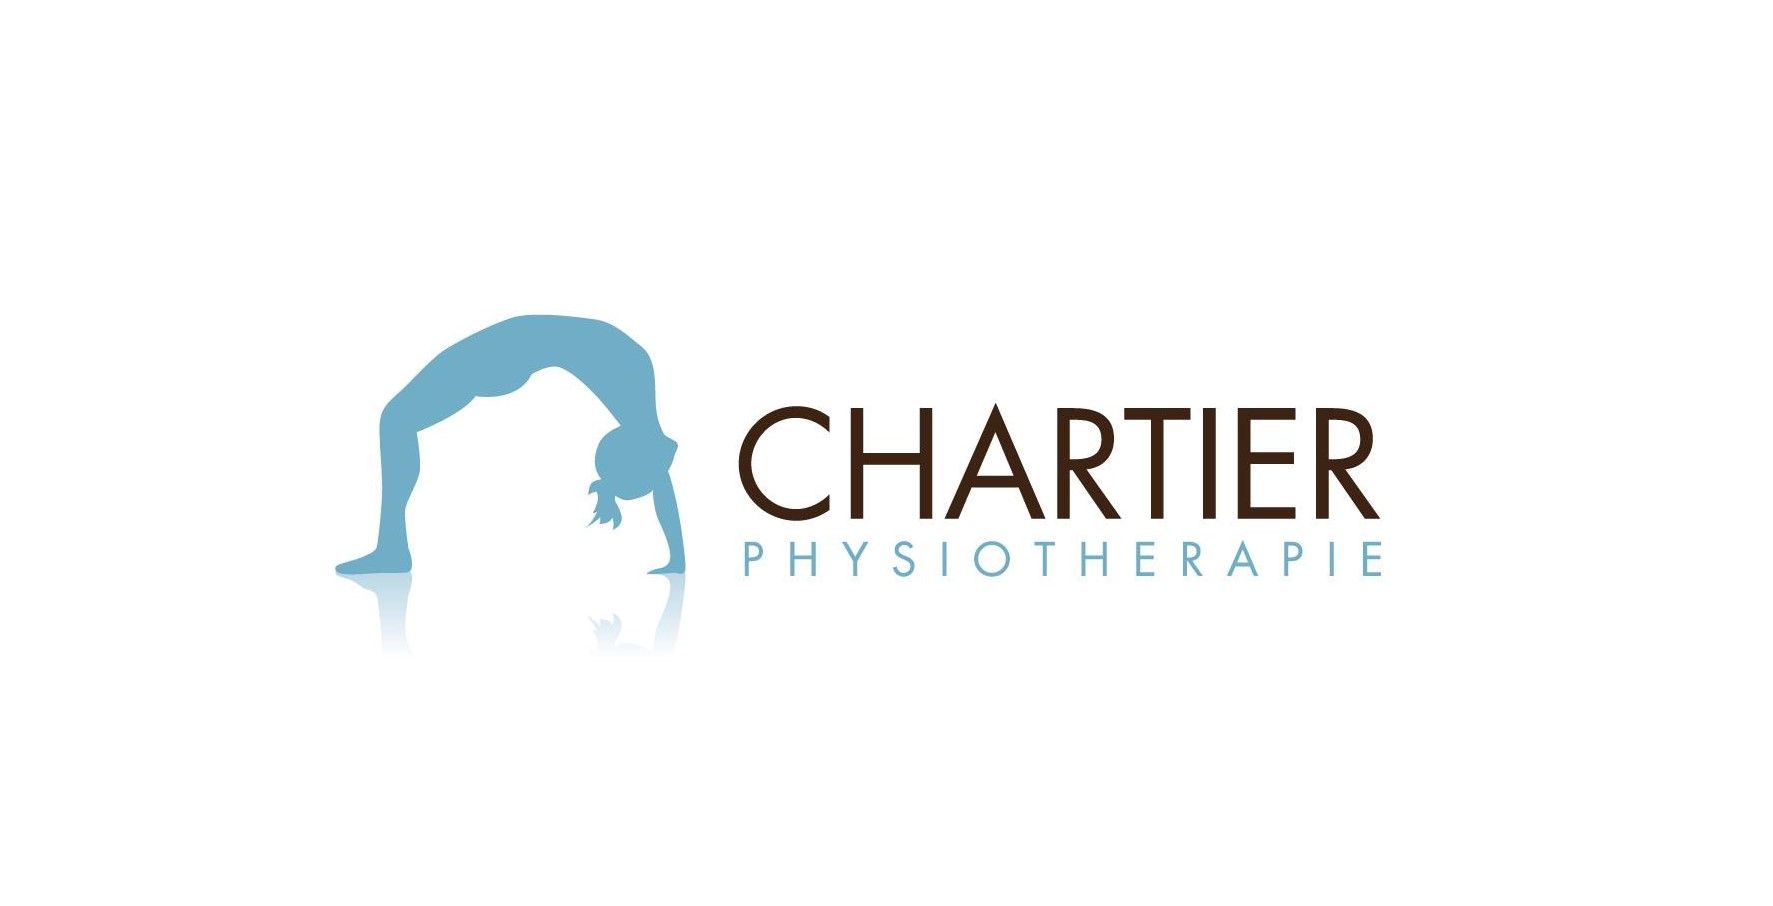 Become Yourself Again - Chartier Physiotherapie